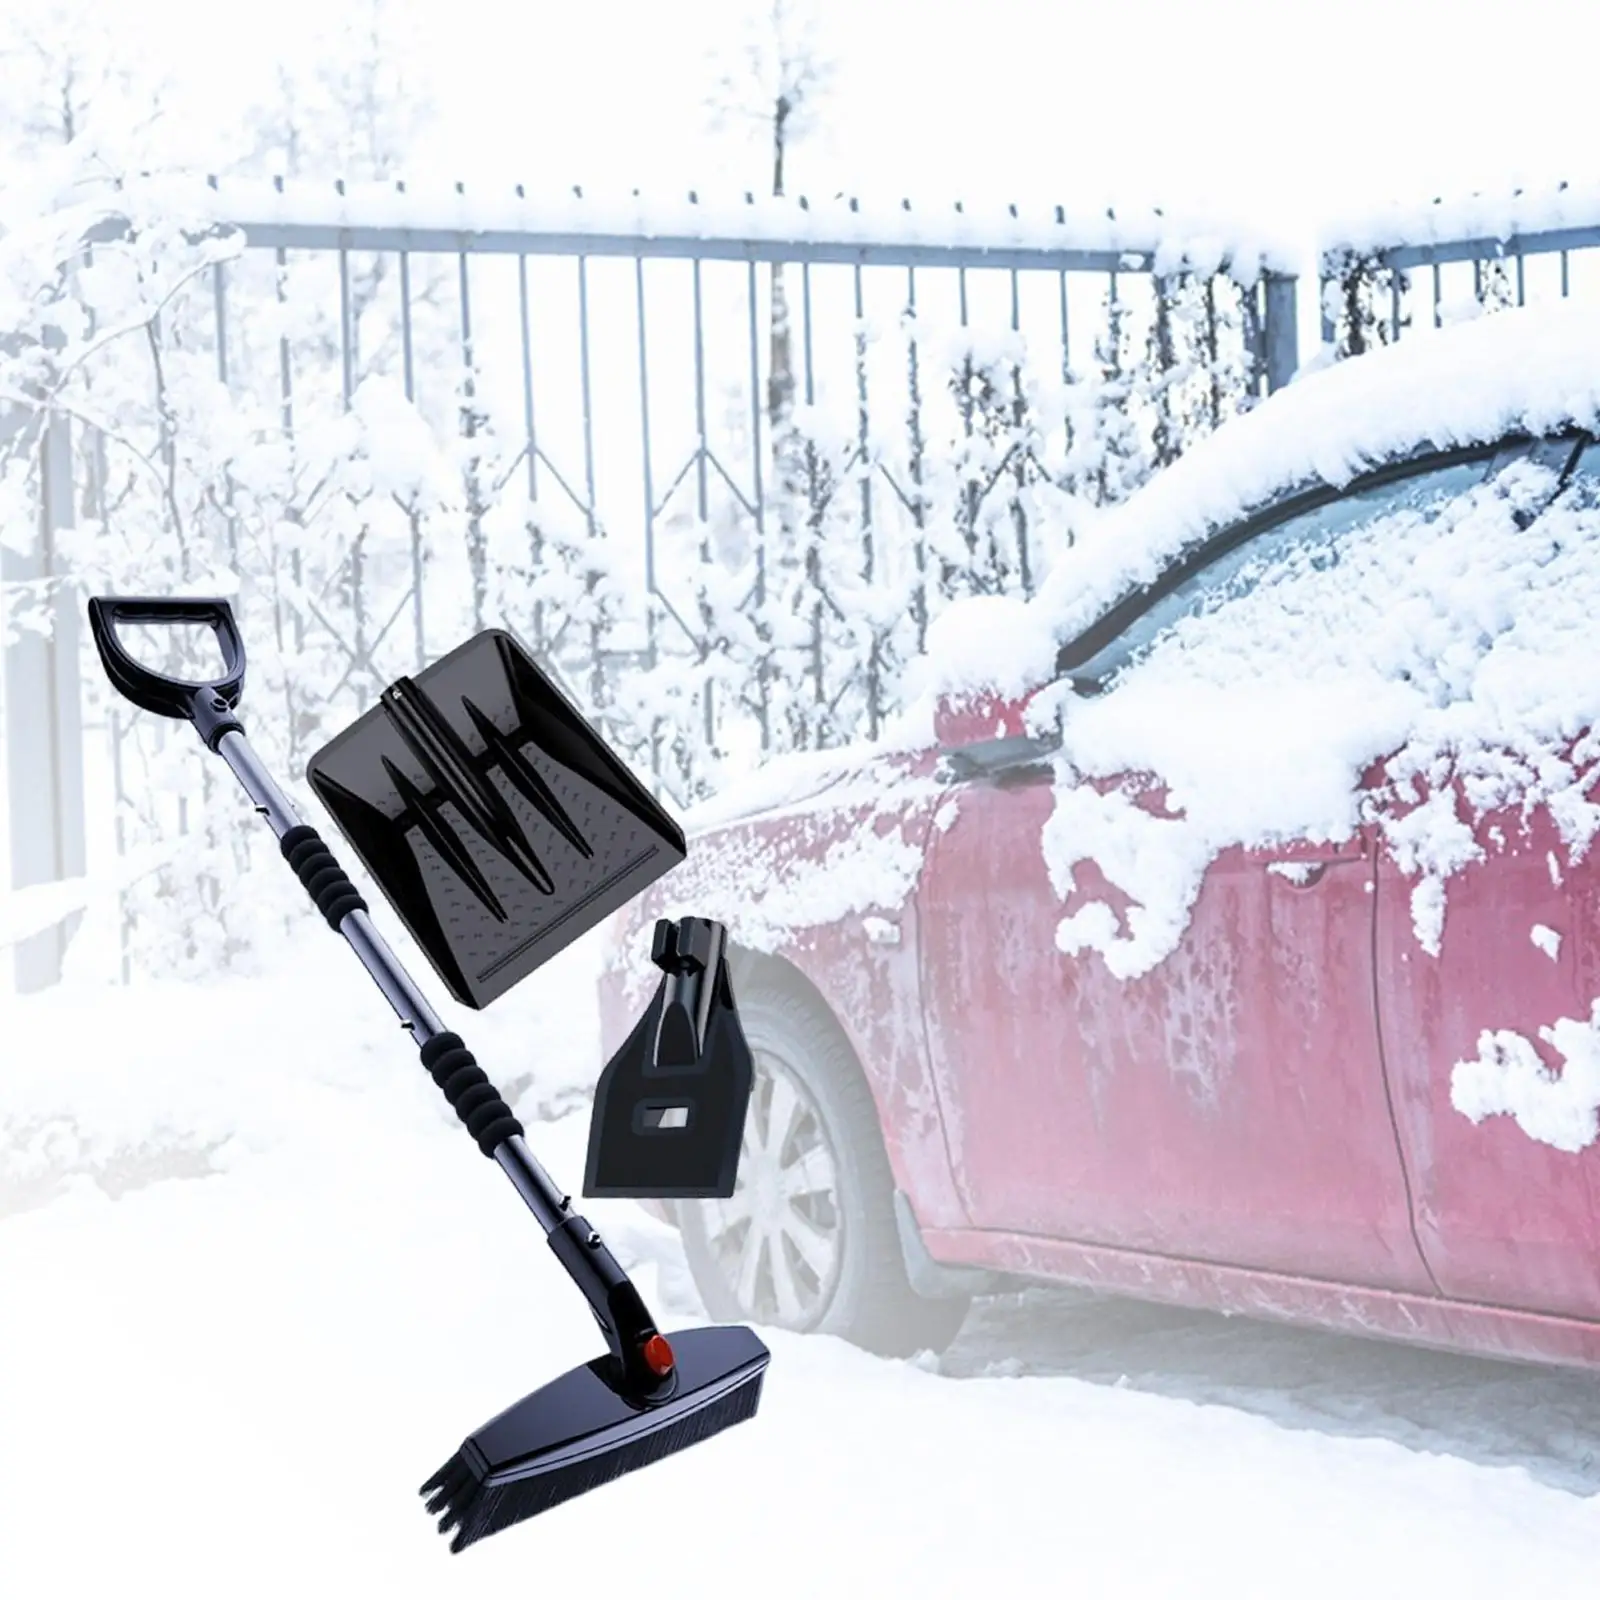 Portable Snow Removal Tool car Window Snow Cleaner Stainless Steel Handle 360° Rotatable Head for Truck Car Vehicles Auto